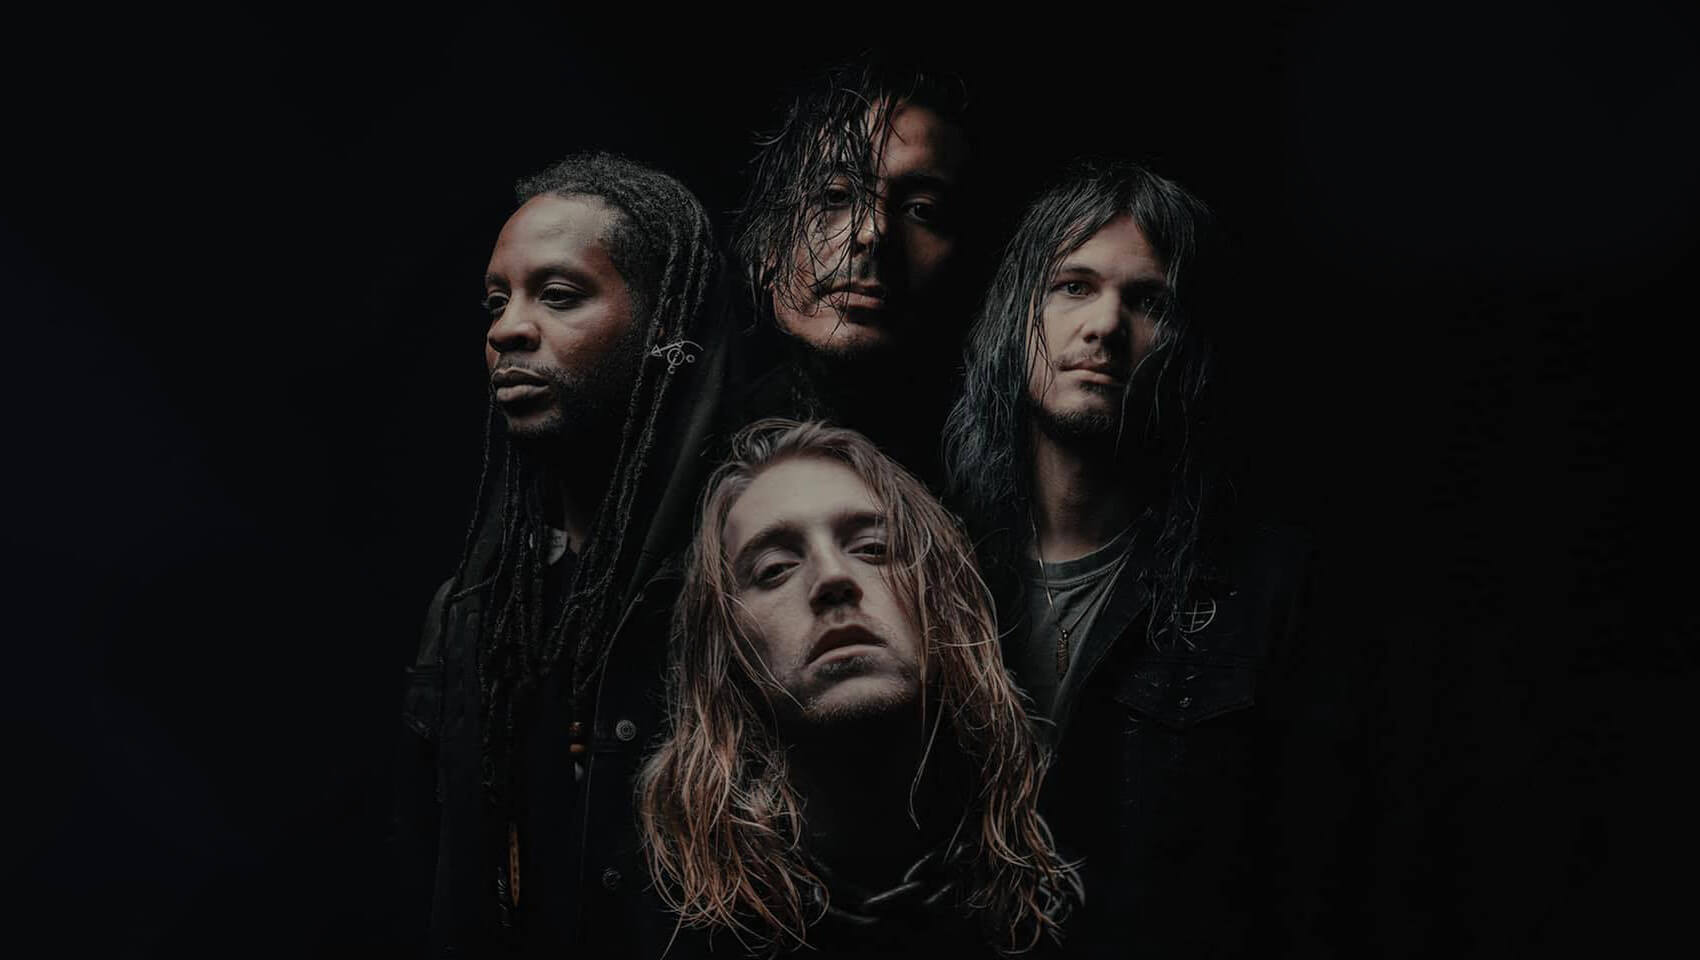 SIGIL RELEASE MUSIC VIDEO FOR NEW SINGLE “WORMTONGUE” (TRACK ANALYSIS)